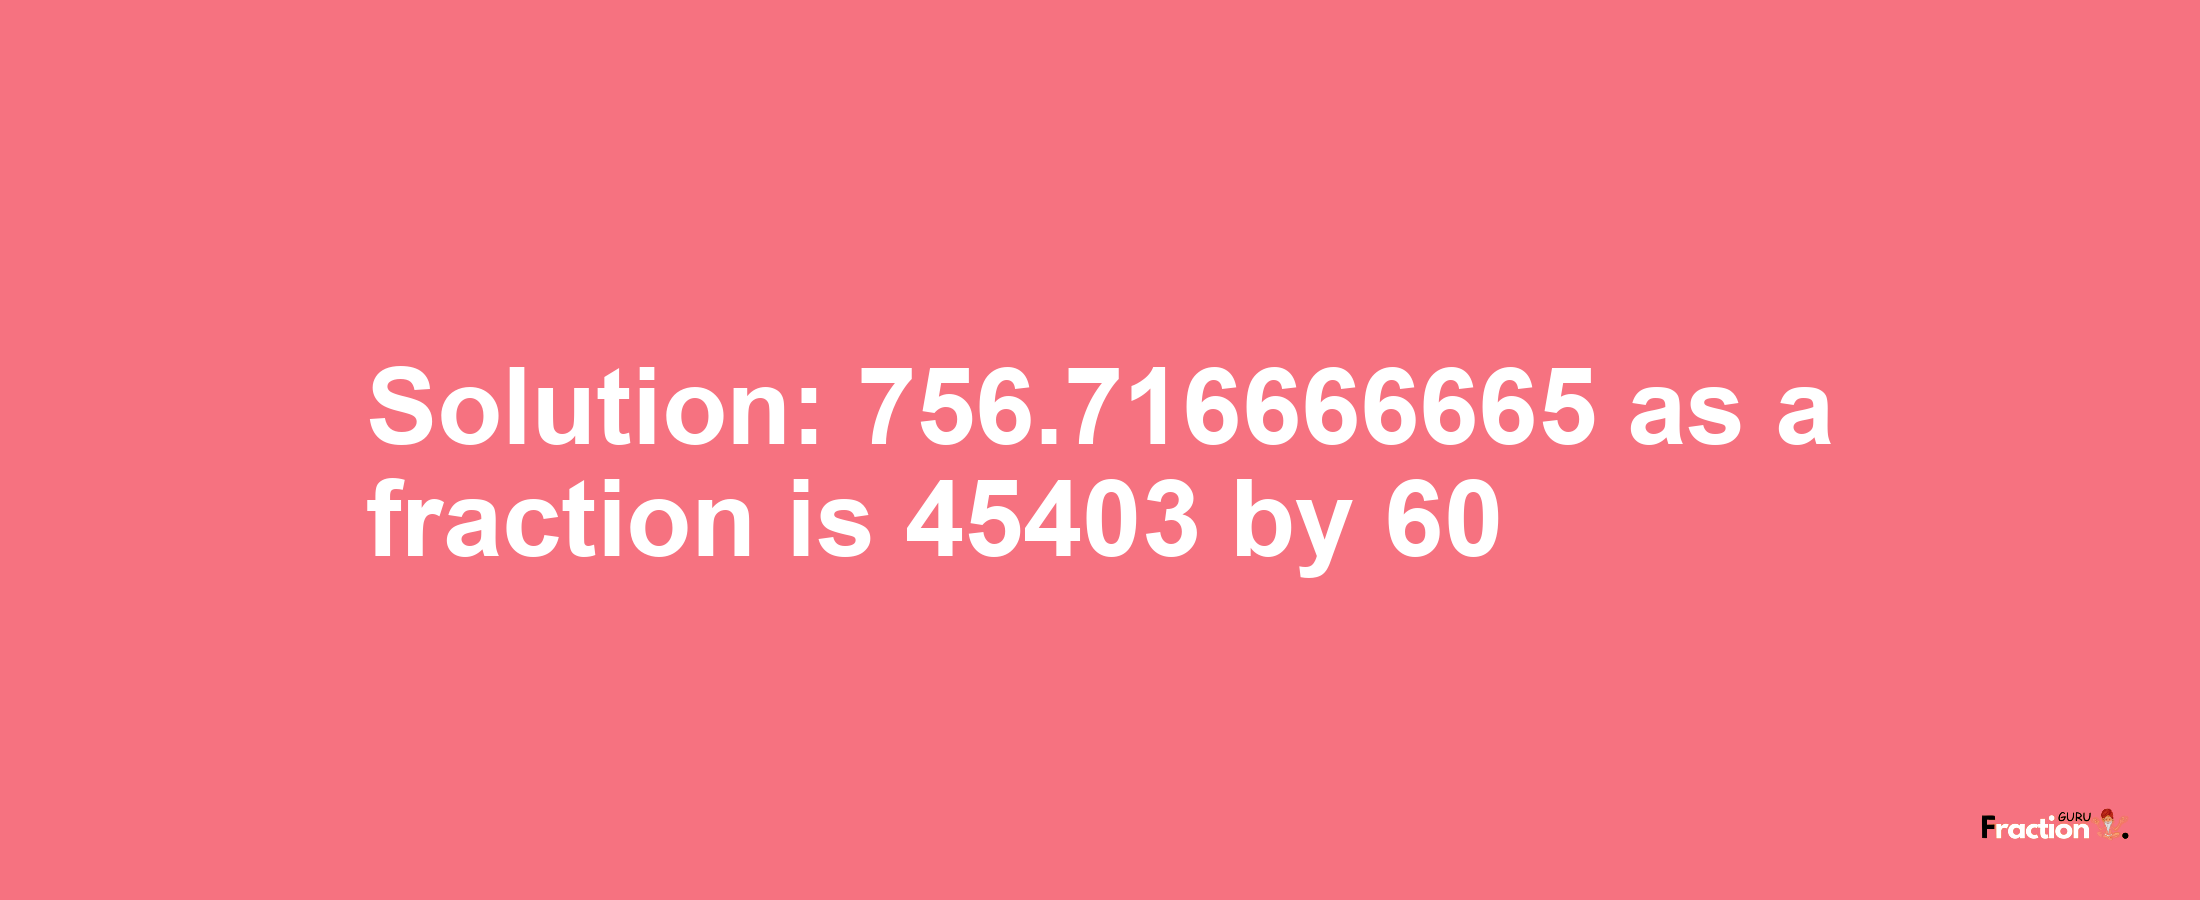 Solution:756.716666665 as a fraction is 45403/60